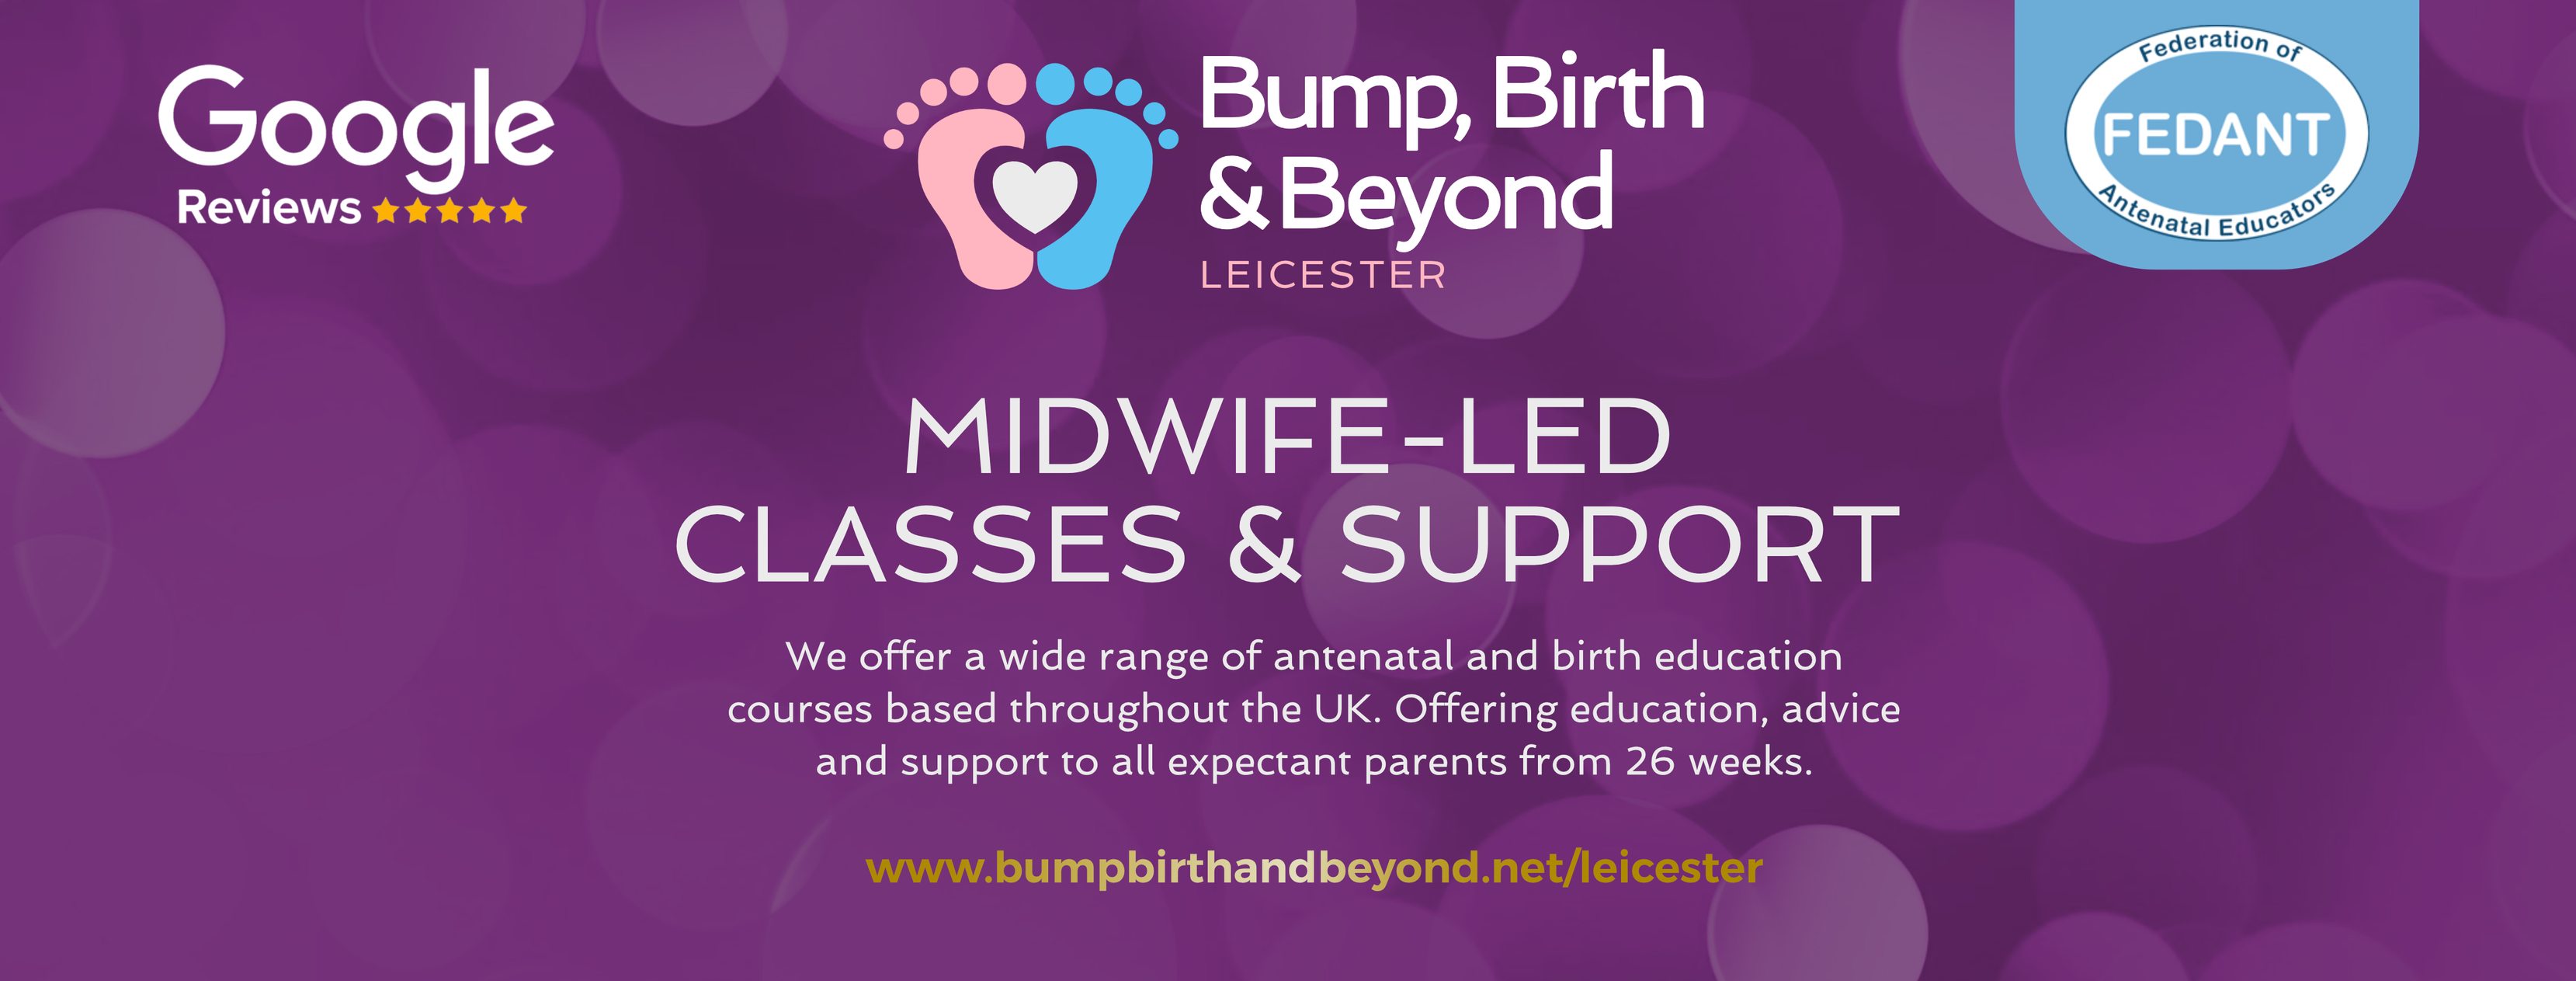 Bump Birth and Beyond - Leicester 's main image